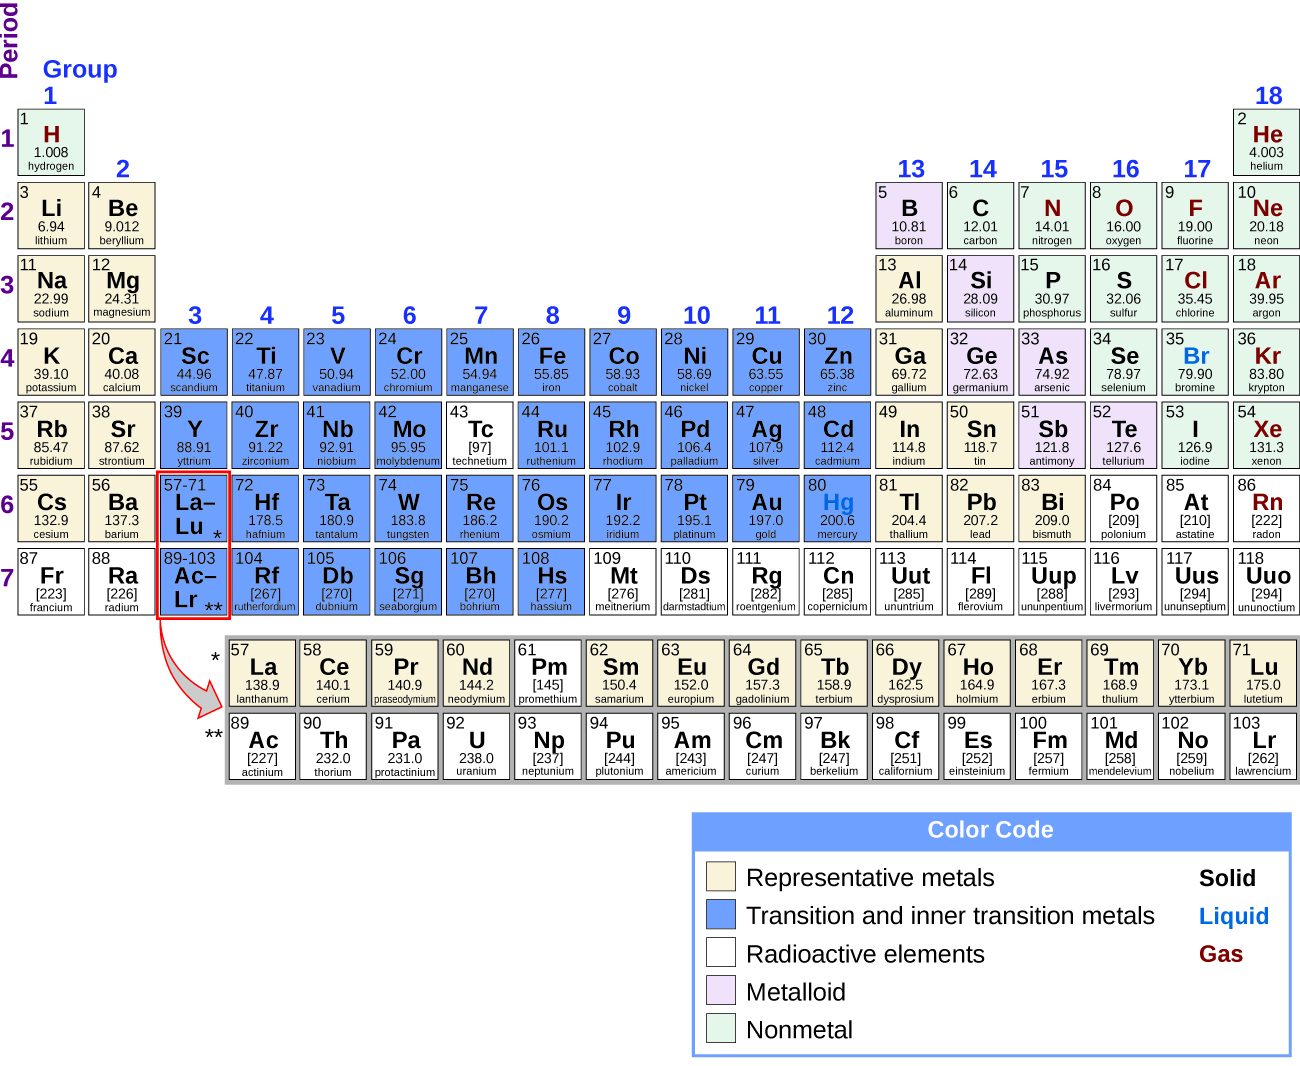 The Periodic Table of Elements is shown. The 18 columns are labeled “Group” and the 7 rows are labeled “Period.” Below the table to the right is a box labeled “Color Code” with different colors for representative metals, transition and inner transition metals, radioactive elements, metalloids, and nonmetals, as well as solids, liquids, and gases. Each element will be described in this order: atomic number; name; symbol; whether it is a representative metal, transition and inner transition metal, radioactive element, metalloid, or nonmetal; whether it is a solid, liquid, or gas; and atomic mass. Beginning at the top left of the table, or period 1, group 1, is a box containing “1; hydrogen; H; nonmetal; gas; and 1.008.” There is only one other element box in period 1, group 18, which contains “2; helium; H e; nonmetal; gas; and 4.003.” Period 2, group 1 contains “3; lithium; L i; representative metal; solid; and 6.94” Group 2 contains “4; beryllium; B e; representative metal; solid; and 9.012.” Groups 3 through 12 are skipped and group 13 contains “5; boron; B; metalloid; solid; 10.81.” Group 14 contains “6; carbon; C; nonmetal; solid; and 12.01.” Group 15 contains “7; nitrogen; N; nonmetal; gas; and 14.01.” Group 16 contains “8; oxygen; O; nonmetal; gas; and 16.00.” Group 17 contains “9; fluorine; F; nonmetal; gas; and 19.00.” Group 18 contains “10; neon; N e; nonmetal; gas; and 20.18.” Period 3, group 1 contains “11; sodium; N a; representative metal; solid; and 22.99.” Group 2 contains “12; magnesium; M g; representative metal; solid; and 24.31.” Groups 3 through 12 are skipped again in period 3 and group 13 contains “13; aluminum; A l; representative metal; solid; and 26.98.” Group 14 contains “14; silicon; S i; metalloid; solid; and 28.09.” Group 15 contains “15; phosphorous; P; nonmetal; solid; and 30.97.” Group 16 contains “16; sulfur; S; nonmetal; solid; and 32.06.” Group 17 contains “17; chlorine; C l; nonmetal; gas; and 35.45.” Group 18 contains “18; argon; A r; nonmetal; gas; and 39.95.” Period 4, group 1 contains “19; potassium; K; representative metal; solid; and 39.10.” Group 2 contains “20; calcium; C a; representative metal; solid; and 40.08.” Group 3 contains “21; scandium; S c; transition and inner transition metal; solid; and 44.96.” Group 4 contains “22; titanium; T i; transition and inner transition metal; solid; and 47.87.” Group 5 contains “23; vanadium; V; transition and inner transition metal; solid; and 50.94.” Group 6 contains “24; chromium; C r; transition and inner transition metal; solid; and 52.00.” Group 7 contains “25; manganese; M n; transition and inner transition metal; solid; and 54.94.” Group 8 contains “26; iron; F e; transition and inner transition metal; solid; and 55.85.” Group 9 contains “27; cobalt; C o; transition and inner transition metal; solid; and 58.93.” Group 10 contains “28; nickel; N i; transition and inner transition metal; solid; and 58.69.” Group 11 contains “29; copper; C u; transition and inner transition metal; solid; and 63.55.” Group 12 contains “30; zinc; Z n; transition and inner transition metal; solid; and 65.38.” Group 13 contains “31; gallium; G a; representative metal; solid; and 69.72.” Group 14 contains “32; germanium; G e; metalloid; solid; and 72.63.” Group 15 contains “33; arsenic; A s; metalloid; solid; and 74.92.” Group 16 contains “34; selenium; S e; nonmetal; solid; and 78.97.” Group 17 contains “35; bromine; B r; nonmetal; liquid; and 79.90.” Group 18 contains “36; krypton; K r; nonmetal; gas; and 83.80.” Period 5, group 1 contains “37; rubidium; R b; representative metal; solid; and 85.47.” Group 2 contains “38; strontium; S r; representative metal; solid; and 87.62.” Group 3 contains “39; yttrium; Y; transition and inner transition metal; solid; and 88.91.” Group 4 contains “40; zirconium; Z r; transition and inner transition metal; solid; and 91.22.” Group 5 contains “41; niobium; N b; transition and inner transition metal; solid; and 92.91.” Group 6 contains “42; molybdenum; M o; transition and inner transition metal; solid; and 95.95.” Group 7 contains “43; technetium; T c; radioactive element; solid; and 97.” Group 8 contains “44; ruthenium; R u; transition and inner transition metal; solid; and 101.1.” Group 9 contains “45; rhodium; R h; transition and inner transition metal; solid; and 102.9.” Group 10 contains “46; palladium; P d; transition and inner transition metal; solid; and 106.4.” Group 11 contains “47; silver; A g; transition and inner transition metal; solid; and 107.9.” Group 12 contains “48; cadmium; C d; transition and inner transition metal; solid; and 112.4.” Group 13 contains “49; indium; I n; representative metal; solid; and 114.8.” Group 14 contains “50; tin; S n; representative metal; solid; and 118.7.” Group 15 contains “51; antimony; S b; metalloid; solid; and 121.8.” Group 16 contains “52; tellurium; T e; metalloid; solid; and 127.6.” Group 17 contains “53; iodine; I; nonmetal; solid; and 126.9.” Group 18 contains “54; xenon; X e; nonmetal; gas; and 131.3.” Period 6, group 1 contains “55; cesium; C s; representative metal; solid; and 132.9.” Group 2 contains “56; barium; B a; representative metal; solid; and 137.3.” Group 3 breaks the pattern. The box has a large arrow pointing to a row of elements below the table with atomic numbers ranging from 57-71. In sequential order by atomic number, the first box in this row contains “57; lanthanum; L a; representative metal; solid; and 138.9.” To its right, the next is “58; cerium; C e; representative metal; solid; and 140.1.” Next is “59; praseodymium; P r; representative metal; solid; and 140.9.” Next is “60; neodymium; N d; representative metal; solid; and 144.2.” Next is “61; promethium; P m; radioactive element; solid; and 145.” Next is “62; samarium; S m; representative metal; solid; and 150.4.” Next is “63; europium; E u; representative metal; solid; and 152.0.” Next is “64; gadolinium; G d; representative metal; solid; and 157.3.” Next is “65; terbium; T b; representative metal; solid; and 158.9.” Next is “66; dysprosium; D y; representative metal; solid; and 162.5.” Next is “67; holmium; H o; representative metal; solid; and 164.9.” Next is “68; erbium; E r; representative metal; solid; and 167.3.” Next is “69; thulium; T m; representative metal; solid; and 168.9.” Next is “70; ytterbium; Y b; representative metal; solid; and 173.1.” The last in this special row is “71; lutetium; L u; representative metal; solid; and 175.0.” Continuing in period 6, group 4 contains “72; hafnium; H f; transition and inner transition metal; solid; and 178.5.” Group 5 contains “73; tantalum; T a; transition and inner transition metal; solid; and 180.9.” Group 6 contains “74; tungsten; W; transition and inner transition metal; solid; and 183.8.” Group 7 contains “75; rhenium; R e; transition and inner transition metal; solid; and 186.2.” Group 8 contains “76; osmium; O s; transition and inner transition metal; solid; and 190.2.” Group 9 contains “77; iridium; I r; transition and inner transition metal; solid; and 192.2.” Group 10 contains “78; platinum; P t; transition and inner transition metal; solid; and 195.1.” Group 11 contains “79; gold; A u; transition and inner transition metal; solid; and 197.0.” Group 12 contains “80; mercury; H g; transition and inner transition metal; liquid; and 200.6.” Group 13 contains “81; thallium; T l; representative metal; solid; and 204.4.” Group 14 contains “82; lead; P b; representative metal; solid; and 207.2.” Group 15 contains “83; bismuth; B i; representative metal; solid; and 209.0.” Group 16 contains “84; polonium; P o; radioactive element; solid; and 209.” Group 17 contains “85; astatine; A t; radioactive element; solid; and 210.” Group 18 contains “86; radon; R n; radioactive element; gas; and 222.” Period 7, group 1 contains “87; francium; F r; radioactive element; solid; and 223.” Group 2 contains “88; radium; R a; radioactive element; solid; and 226.” Group 3 breaks the pattern much like what occurs in period 6. A large arrow points from the box in period 7, group 3 to a special row containing the elements with atomic numbers ranging from 89-103, just below the row which contains atomic numbers 57-71. In sequential order by atomic number, the first box in this row contains “89; actinium; A c; radioactive element; solid; and 227.” To its right, the next is “90; thorium; T h; radioactive element; solid; and 232.0.” Next is “91; protactinium; P a; radioactive element; solid; and 231.0.” Next is “92; uranium; U; radioactive element; solid; and 238.0.” Next is “93; neptunium; N p; radioactive element; solid; and N p.” Next is “94; plutonium; P u; radioactive element; solid; and 244.” Next is “95; americium; A m; radioactive element; solid; and 243.” Next is “96; curium; C m; radioactive element; solid; and 247.” Next is “97; berkelium; B k; radioactive element; solid; and 247.” Next is “98; californium; C f; radioactive element; solid; and 251.” Next is “99; einsteinium; E s; radioactive element; solid; and 252.” Next is “100; fermium; F m; radioactive element; solid; and 257.” Next is “101; mendelevium; M d; radioactive element; solid; and 258.” Next is “102; nobelium; N o; radioactive element; solid; and 259.” The last in this special row is “103; lawrencium; L r; radioactive element; solid; and 262.” Continuing in period 7, group 4 contains “104; rutherfordium; R f; transition and inner transition metal; solid; and 267.” Group 5 contains “105; dubnium; D b; transition and inner transition metal; solid; and 270.” Group 6 contains “106; seaborgium; S g; transition and inner transition metal; solid; and 271.” Group 7 contains “107; bohrium; B h; transition and inner transition metal; solid; and 270.” Group 8 contains “108; hassium; H s; transition and inner transition metal; solid; and 277.” Group 9 contains “109; meitnerium; M t; radioactive element; solid; and 276.” Group 10 contains “110; darmstadtium; D s; radioactive element; solid; and 281.” Group 11 contains “111; roentgenium; R g; radioactive element; solid; and 282.” Group 12 contains “112; copernicium; C n; radioactive element; liquid; and 285.” Group 13 contains “113; ununtrium; U u t; radioactive element; solid; and 285.” Group 14 contains “114; flerovium; F l; radioactive element; solid; and 289.” Group 15 contains “115; ununpentium; U u p; radioactive element; solid; and 288.” Group 16 contains “116; livermorium; L v; radioactive element; solid; and 293.” Group 17 contains “117; ununseptium; U u s; radioactive; solid; and 294.” Group 18 contains “118; ununoctium; U u o; radioactive element; solid; and 294.”